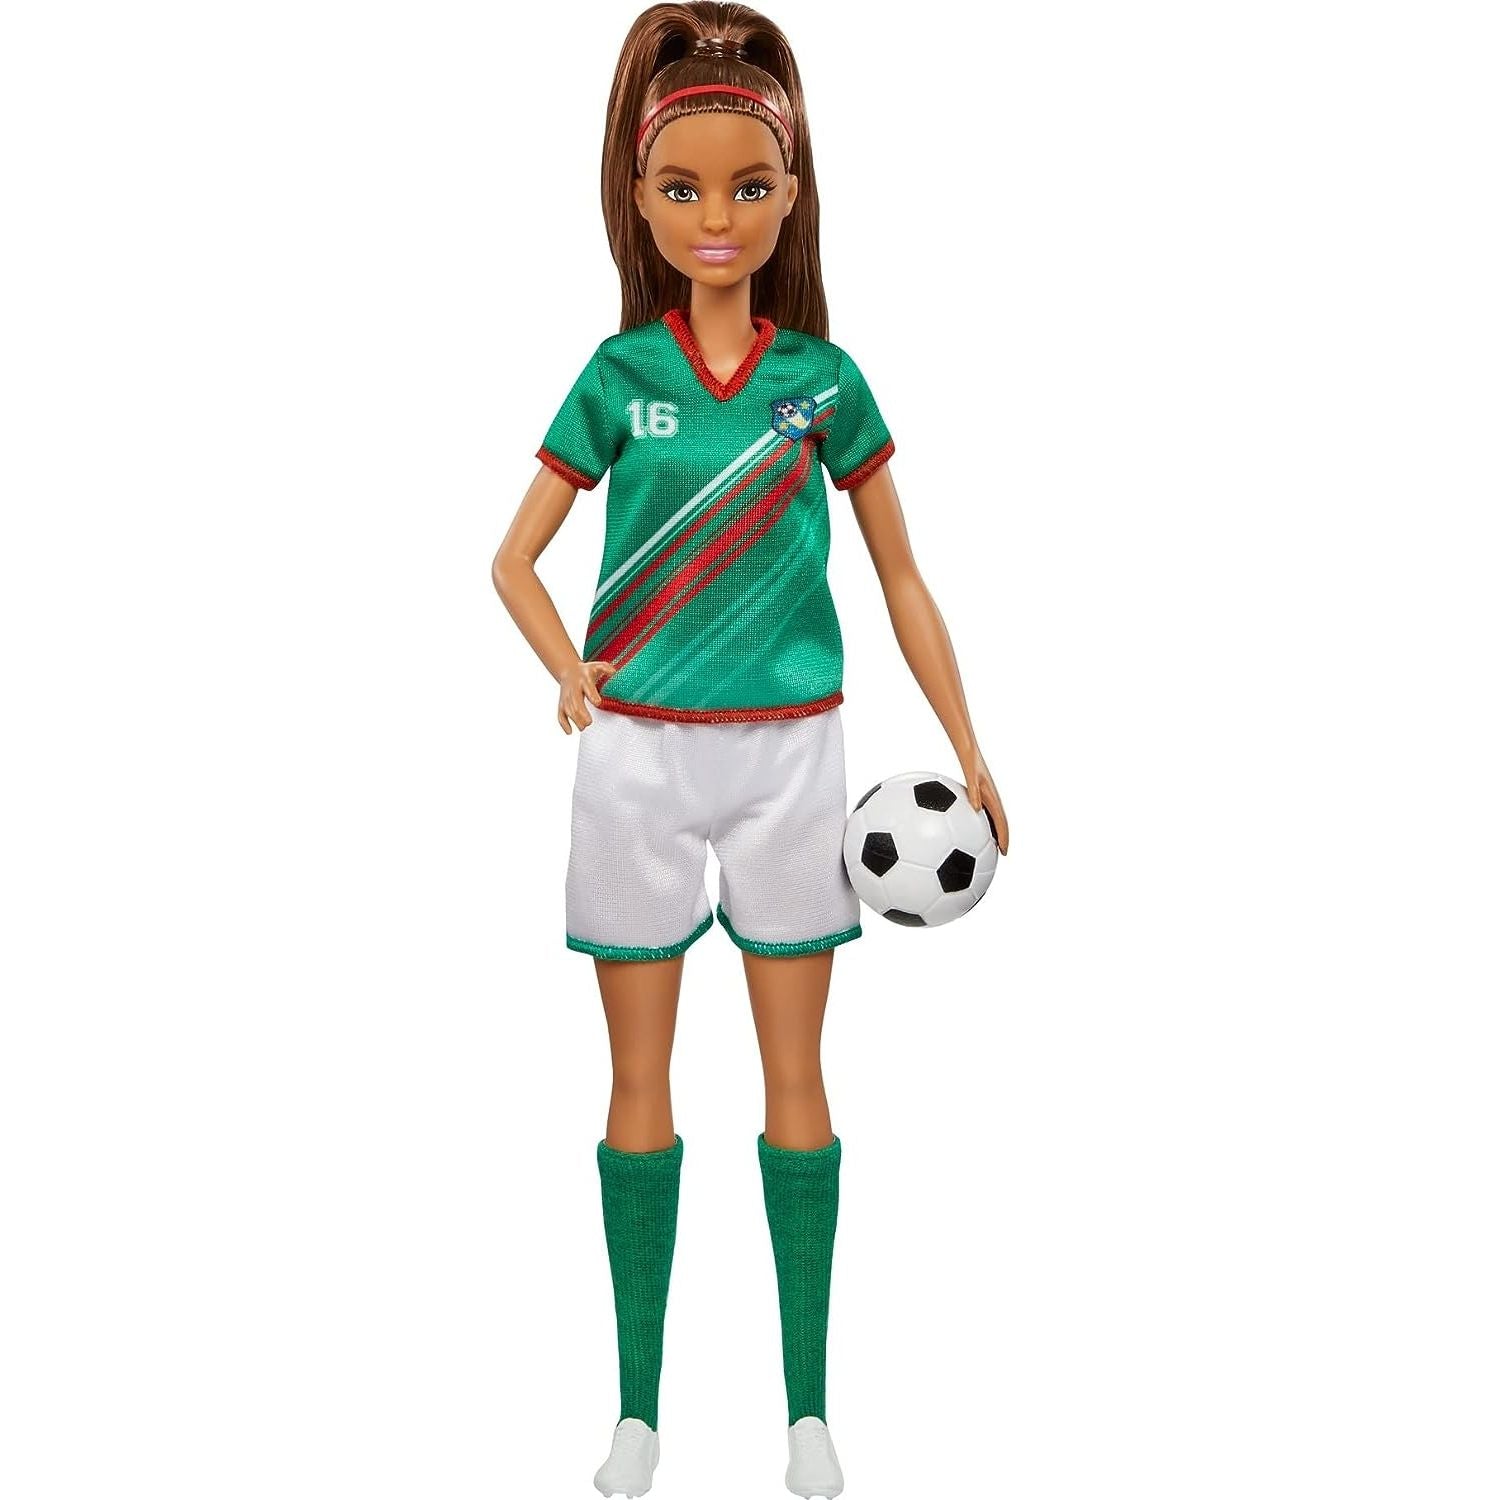 Mattel Barbie Soccer Fashion Doll with Brunette Ponytail, Colorful #16 Uniform, Cleats & Tall Socks, Soccer Ball 11.5 inches